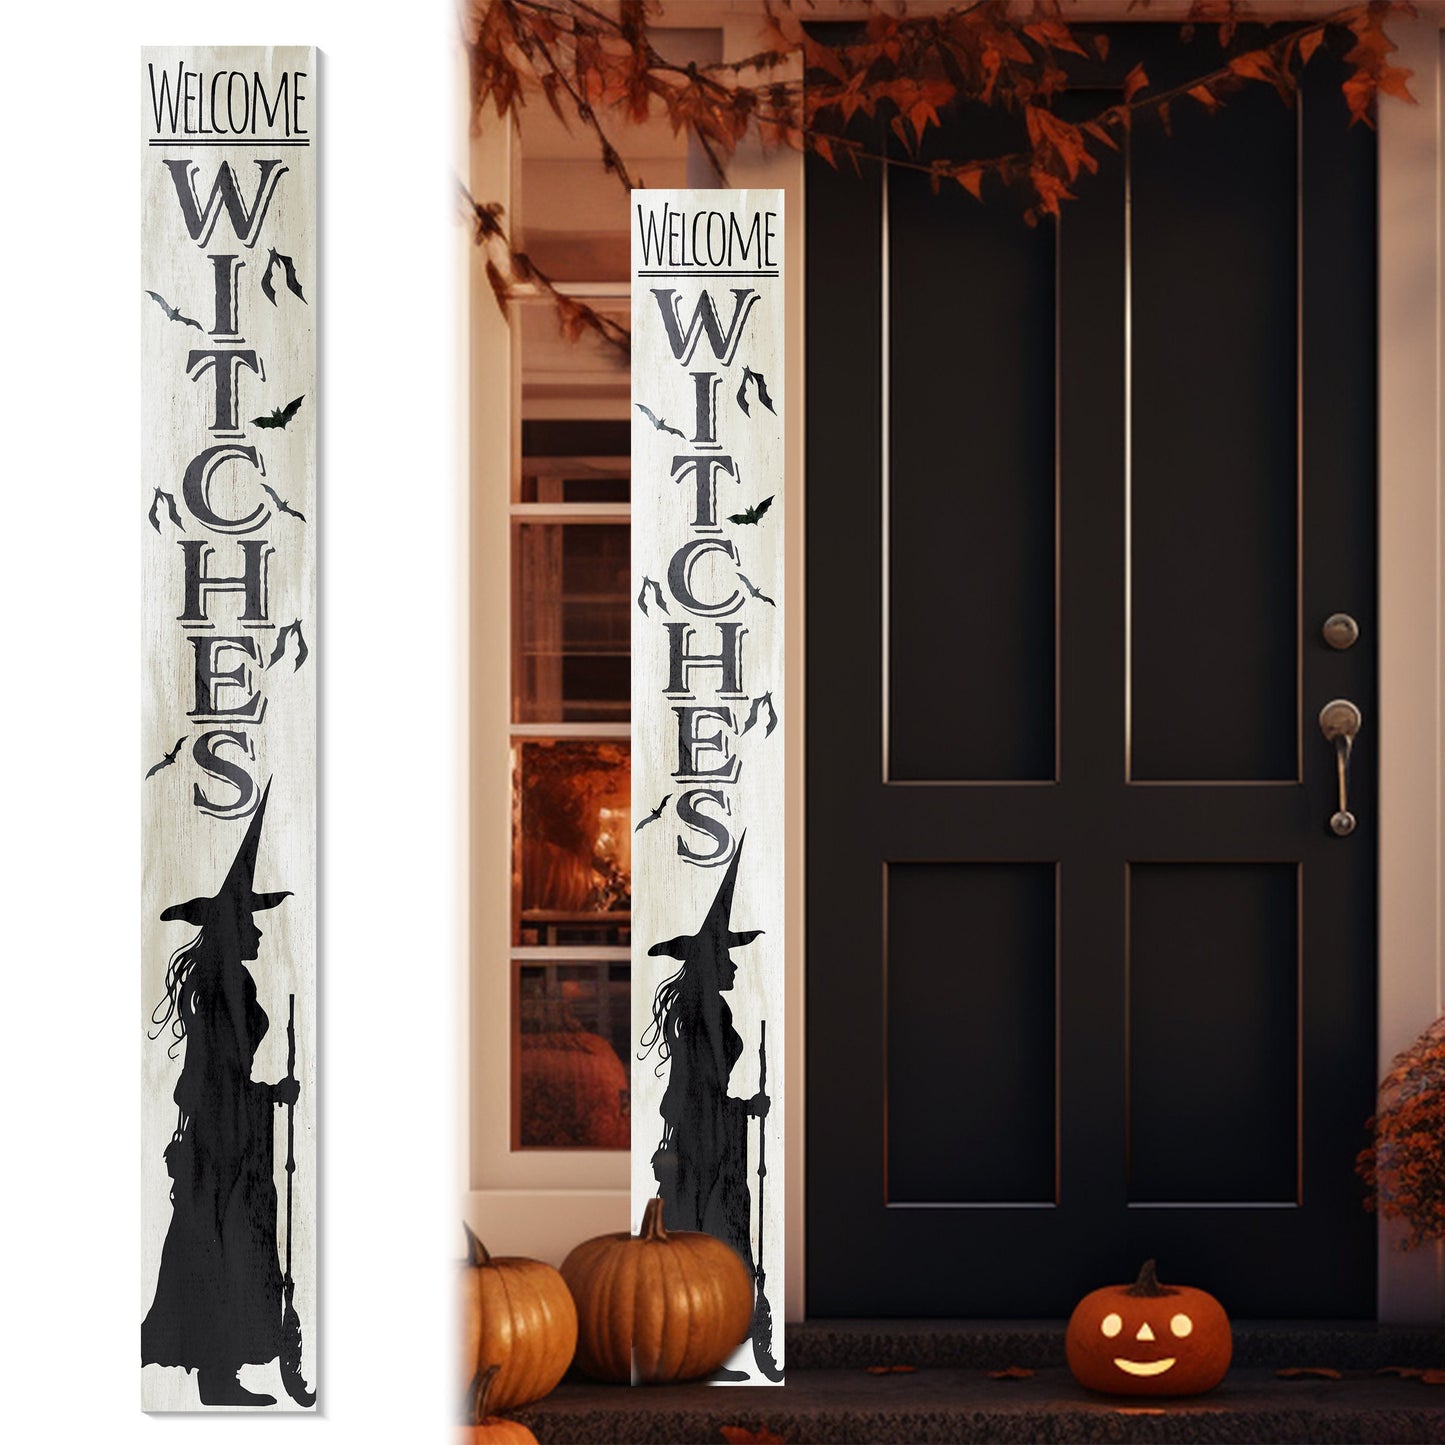 72-Inch "Welcome Witches" Wooden Halloween Sign - Spellbinding Front Door Decor for Porch, Entryway, and Spooky Season Festivities